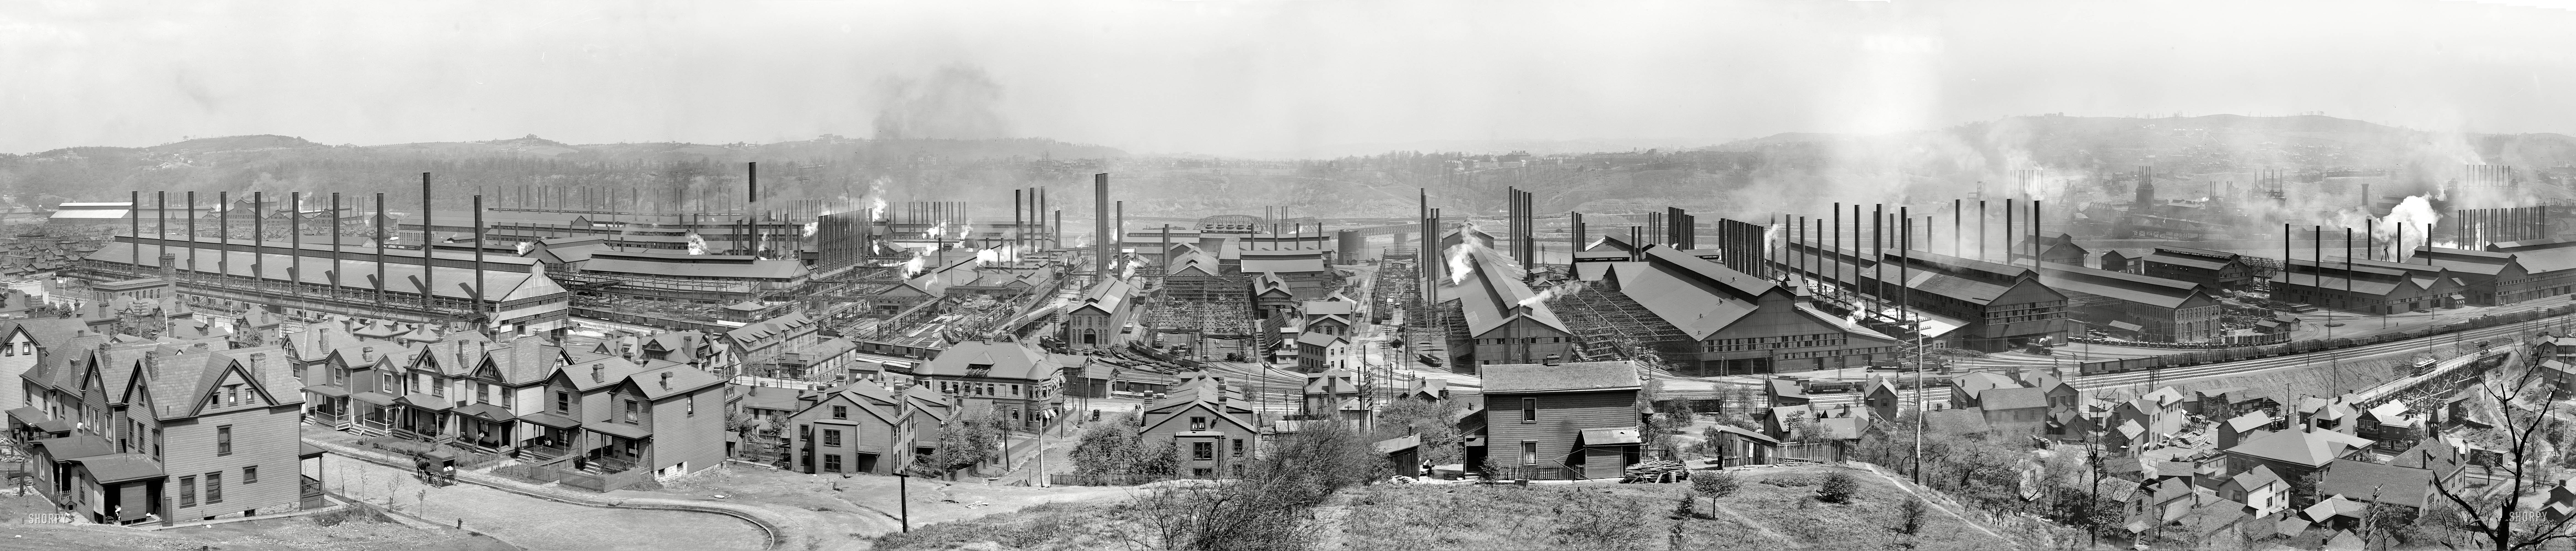 Homestead, Pennsylvania, circa 1910. "Homestead Steel Works, Carnegie Steel Co." Lots of interesting details in this humongous panorama made from four 8x10 inch glass negatives. Detroit Publishing Company. View full size.